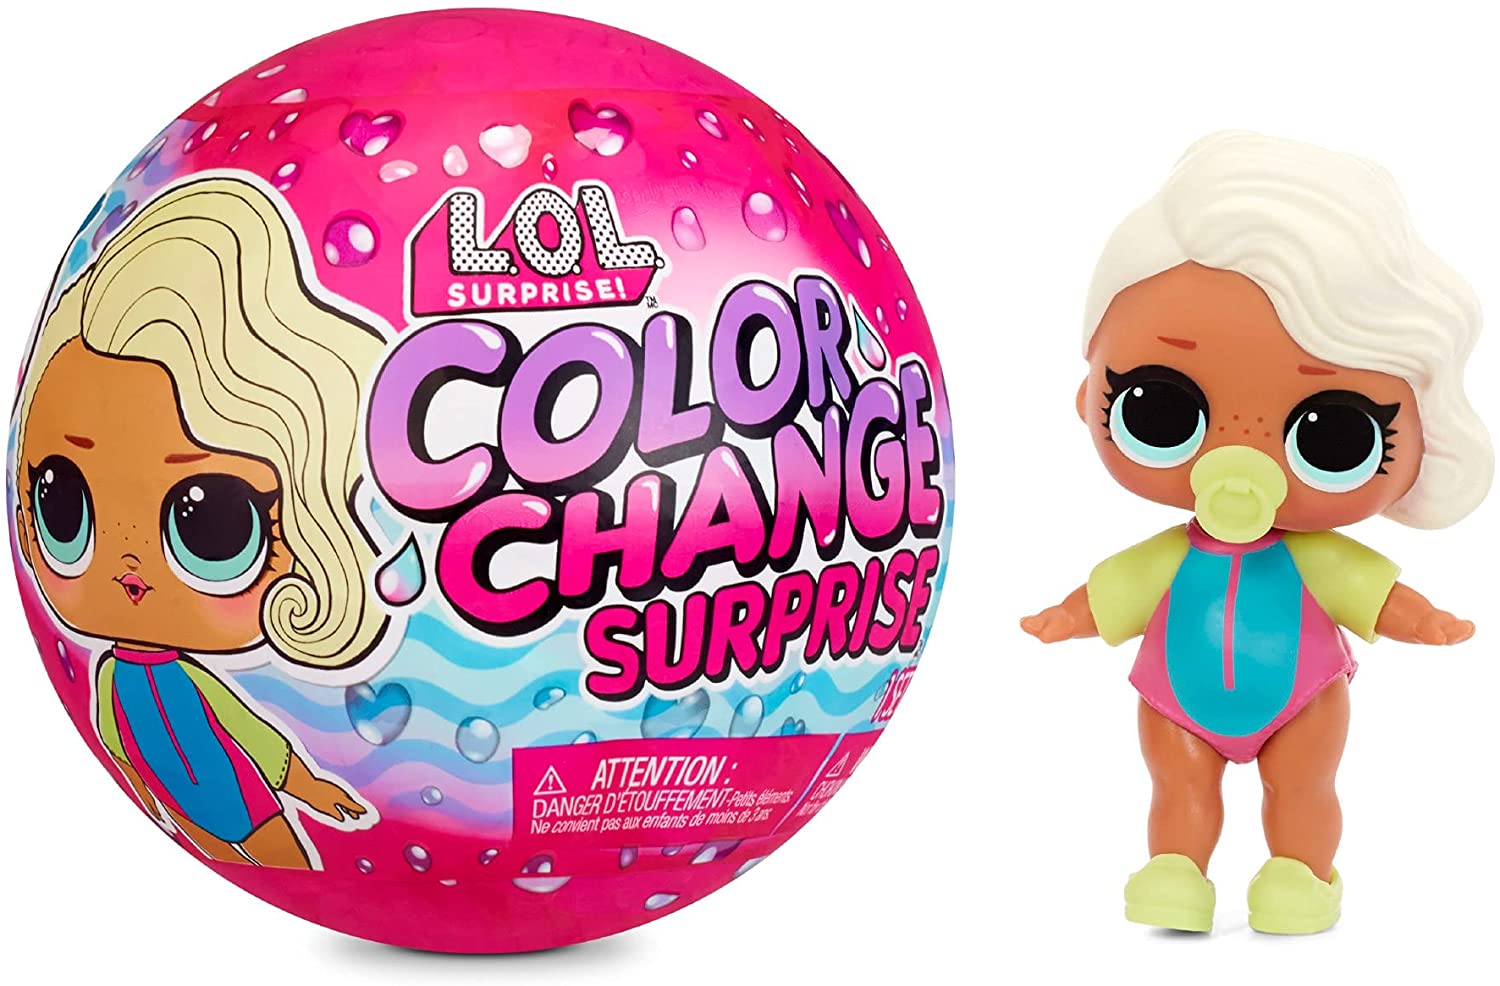 10. LOL Surprise Boys Character Doll with 7 Surprises and Blue Hair and Color Change Hair - wide 9